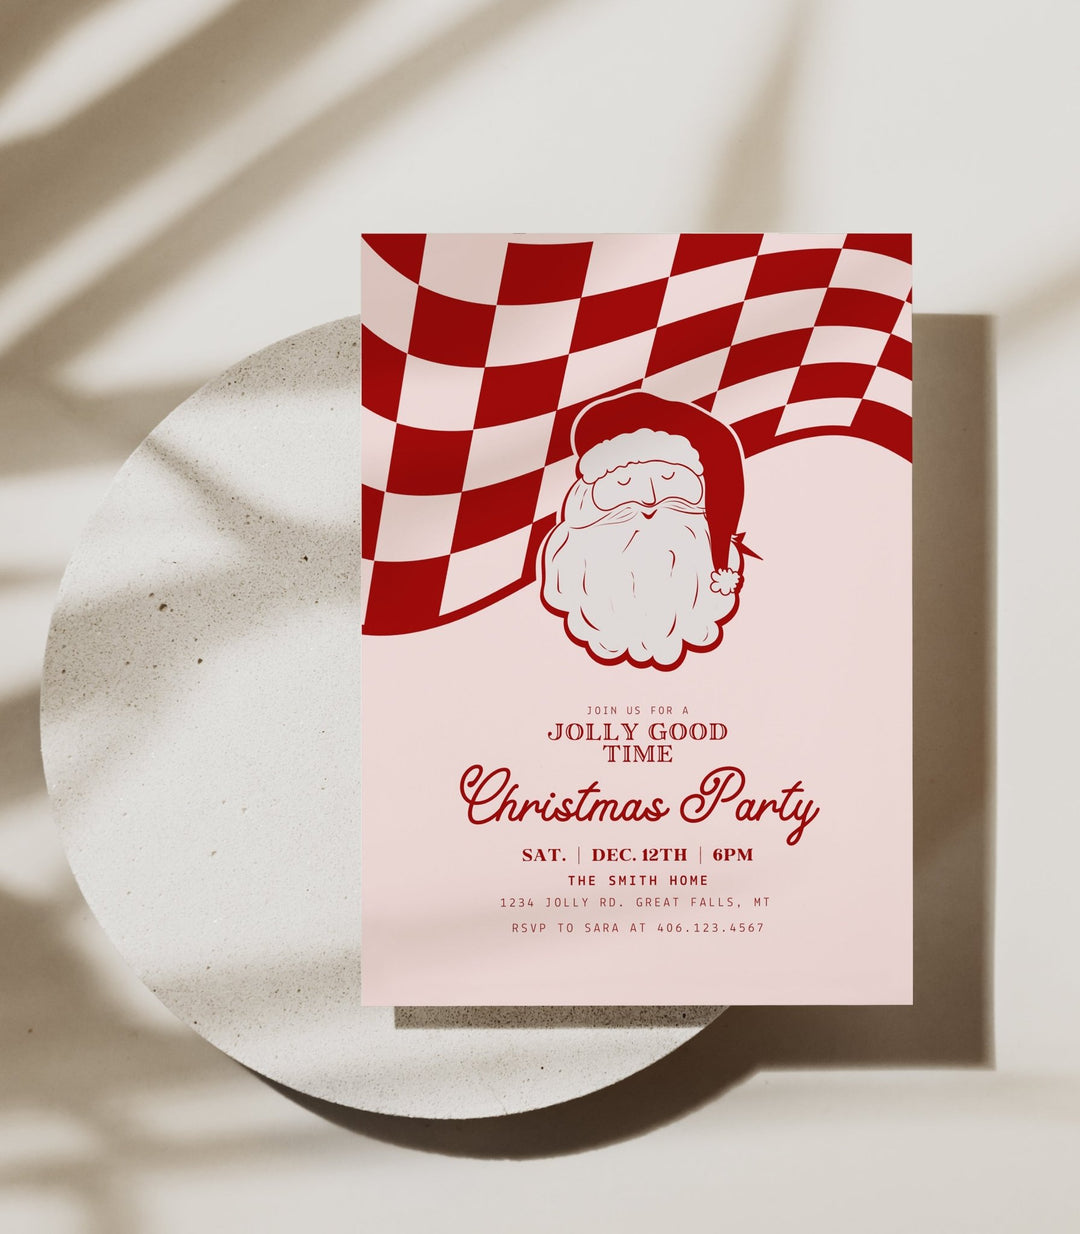 Retro Christmas Party Invitation Printable - Pink and Red - High Peaks Studios